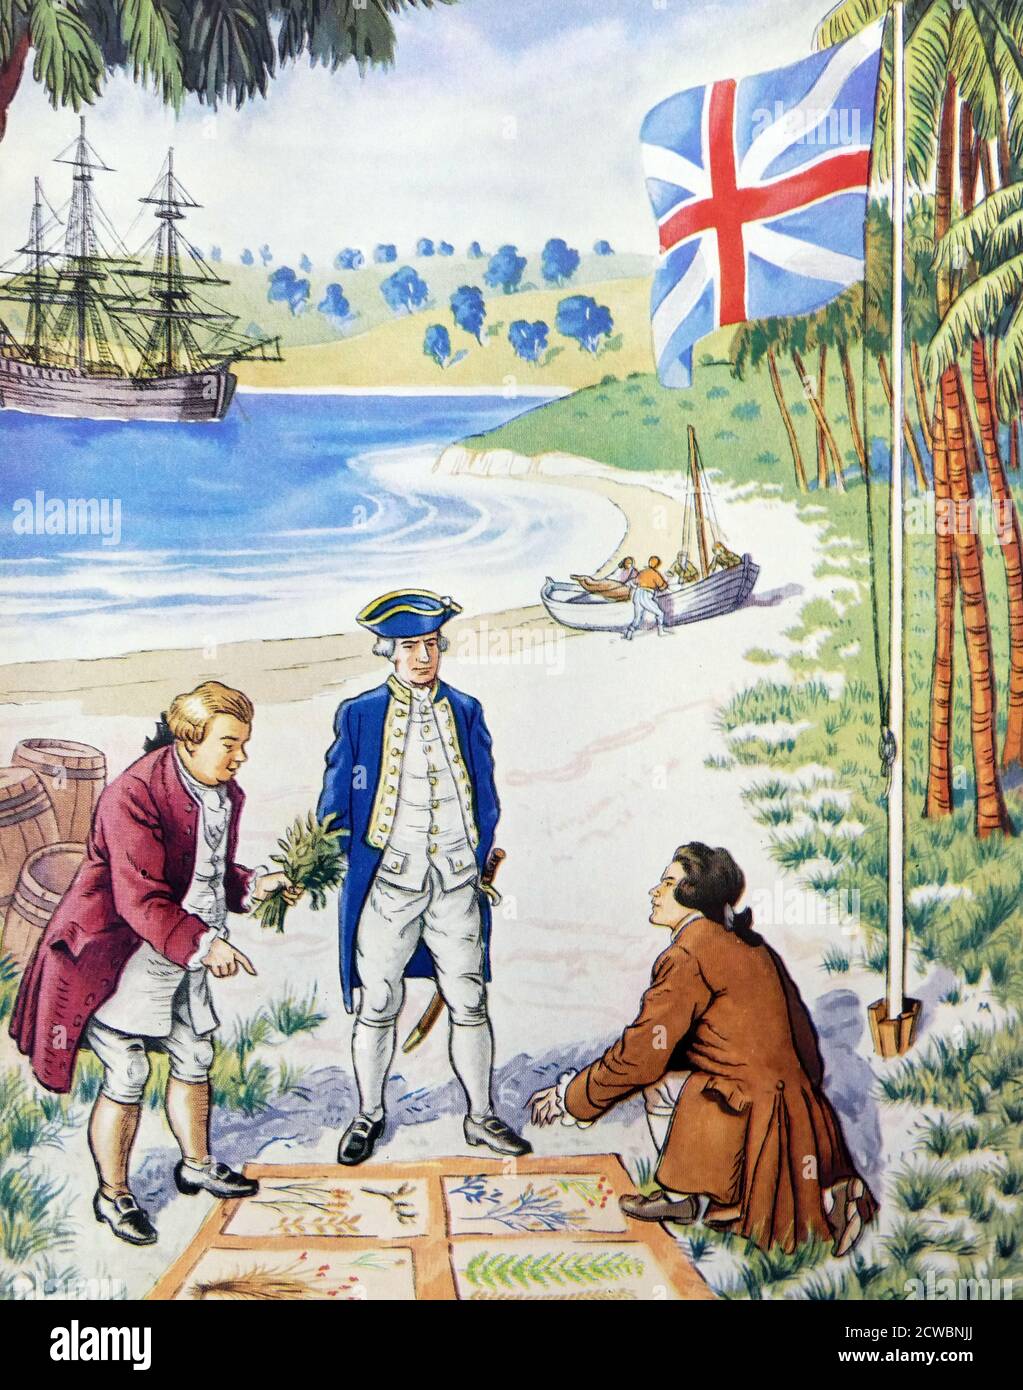 Illustration showing Captain James Cook first landed at Kurnell, on the southern banks of Botany Bay, in what is now Silver Beach, on Sunday 29 April 1770, when navigating his way up the east coast of Australia on his ship, HMS Endeavour. Cook's landing marked the beginning of Britain's interest in Australia and in the eventual colonisation of this new 'southern continent' Stock Photo